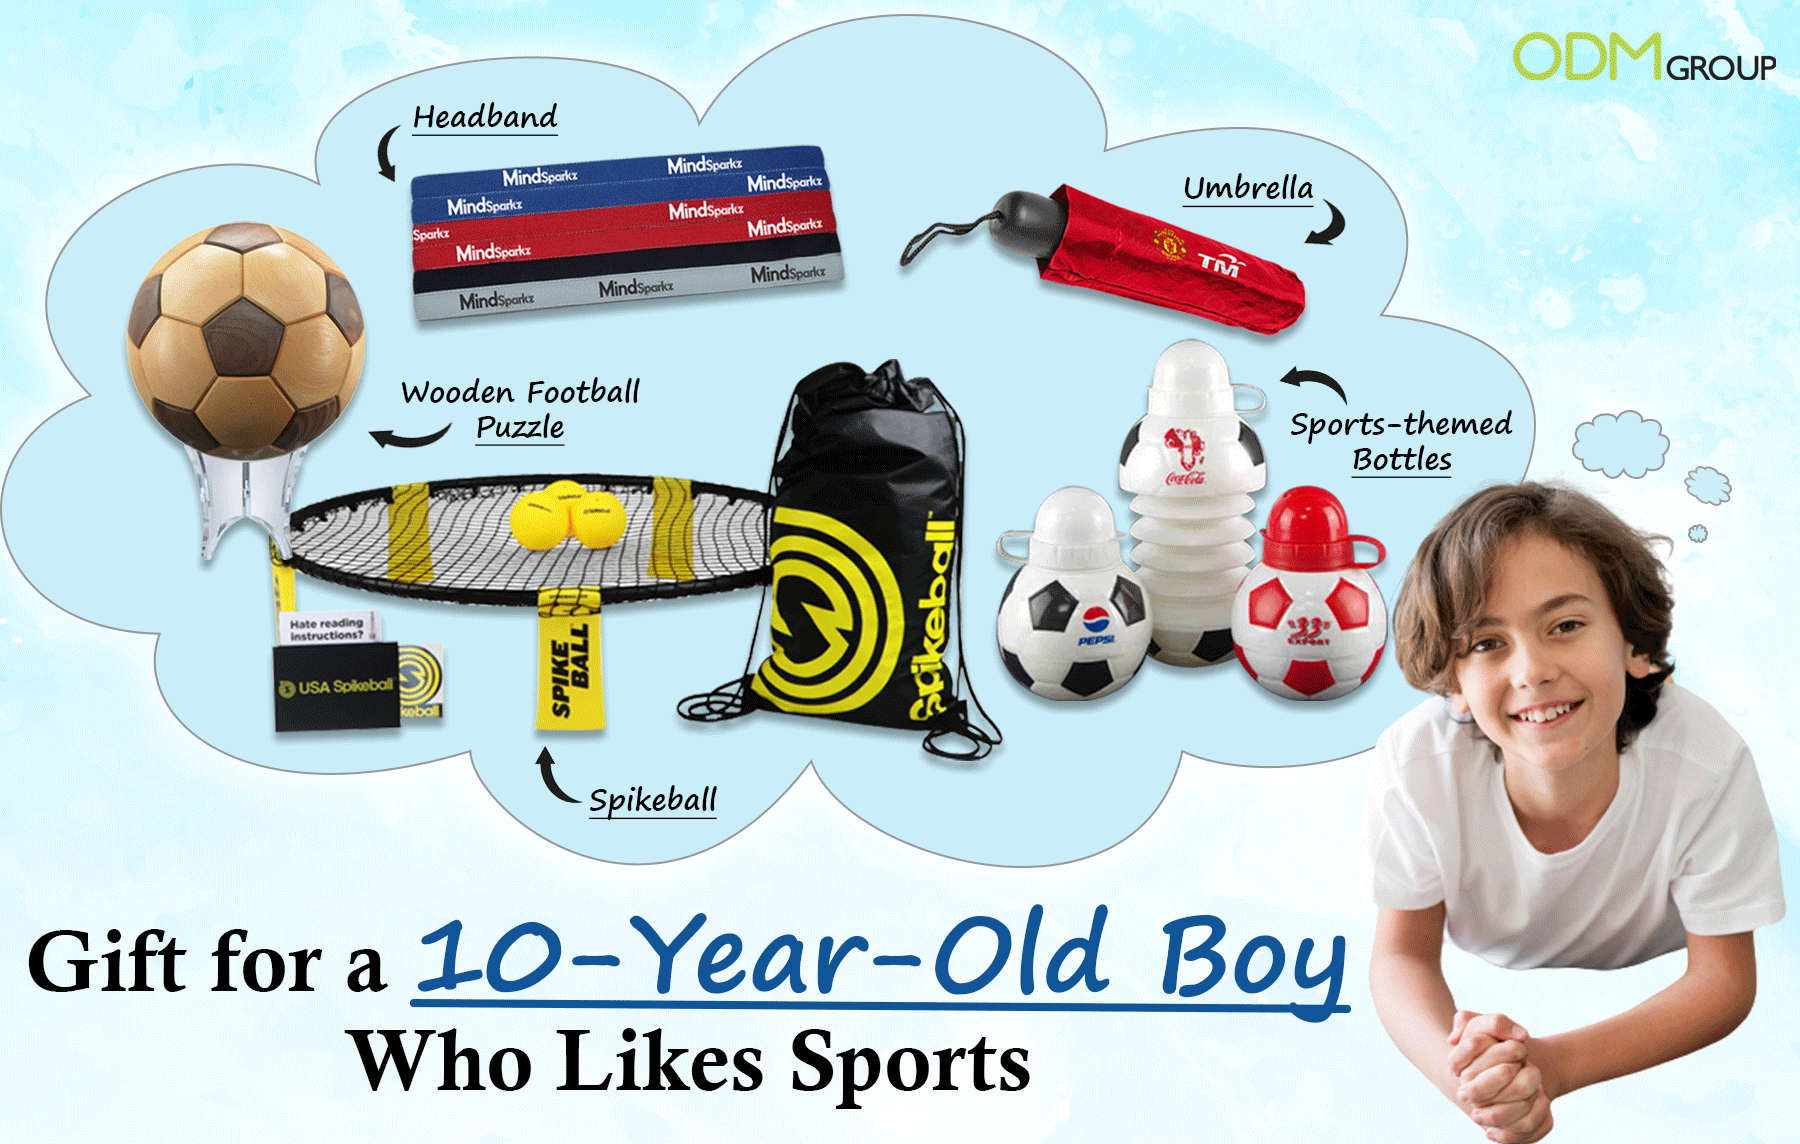 The Best Soccer Gifts for Players, Parents & Coaches